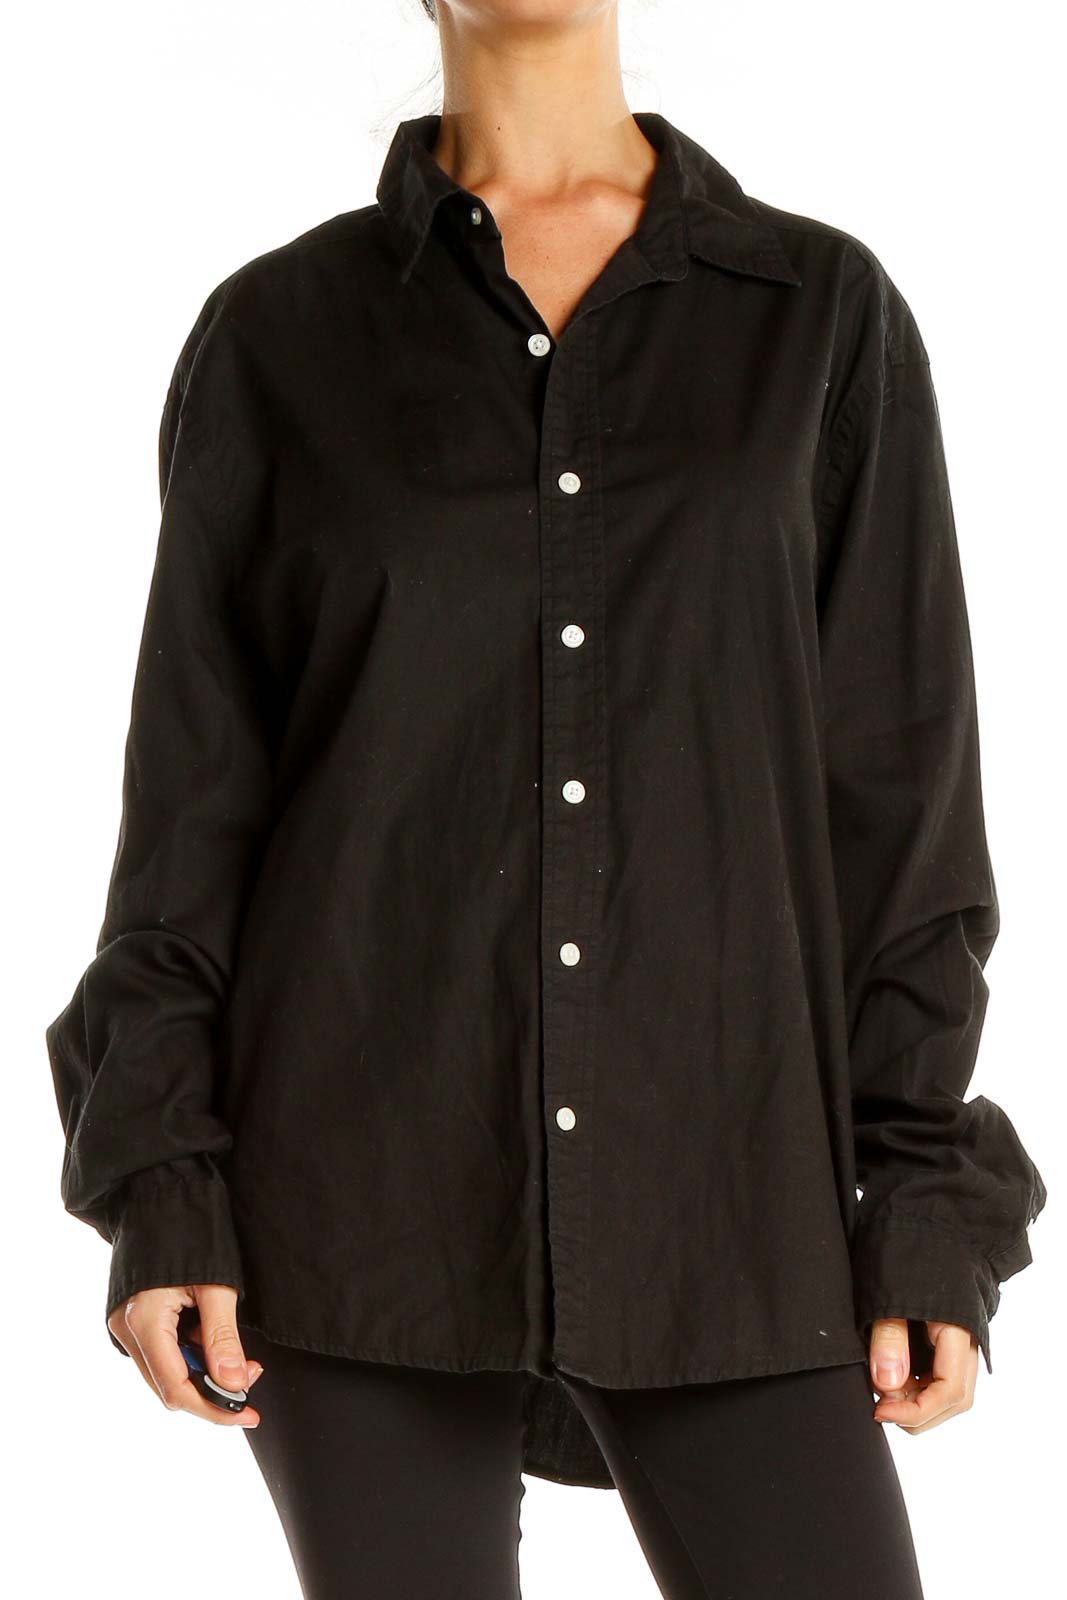 Black Oversized Casual Button Up Top Front